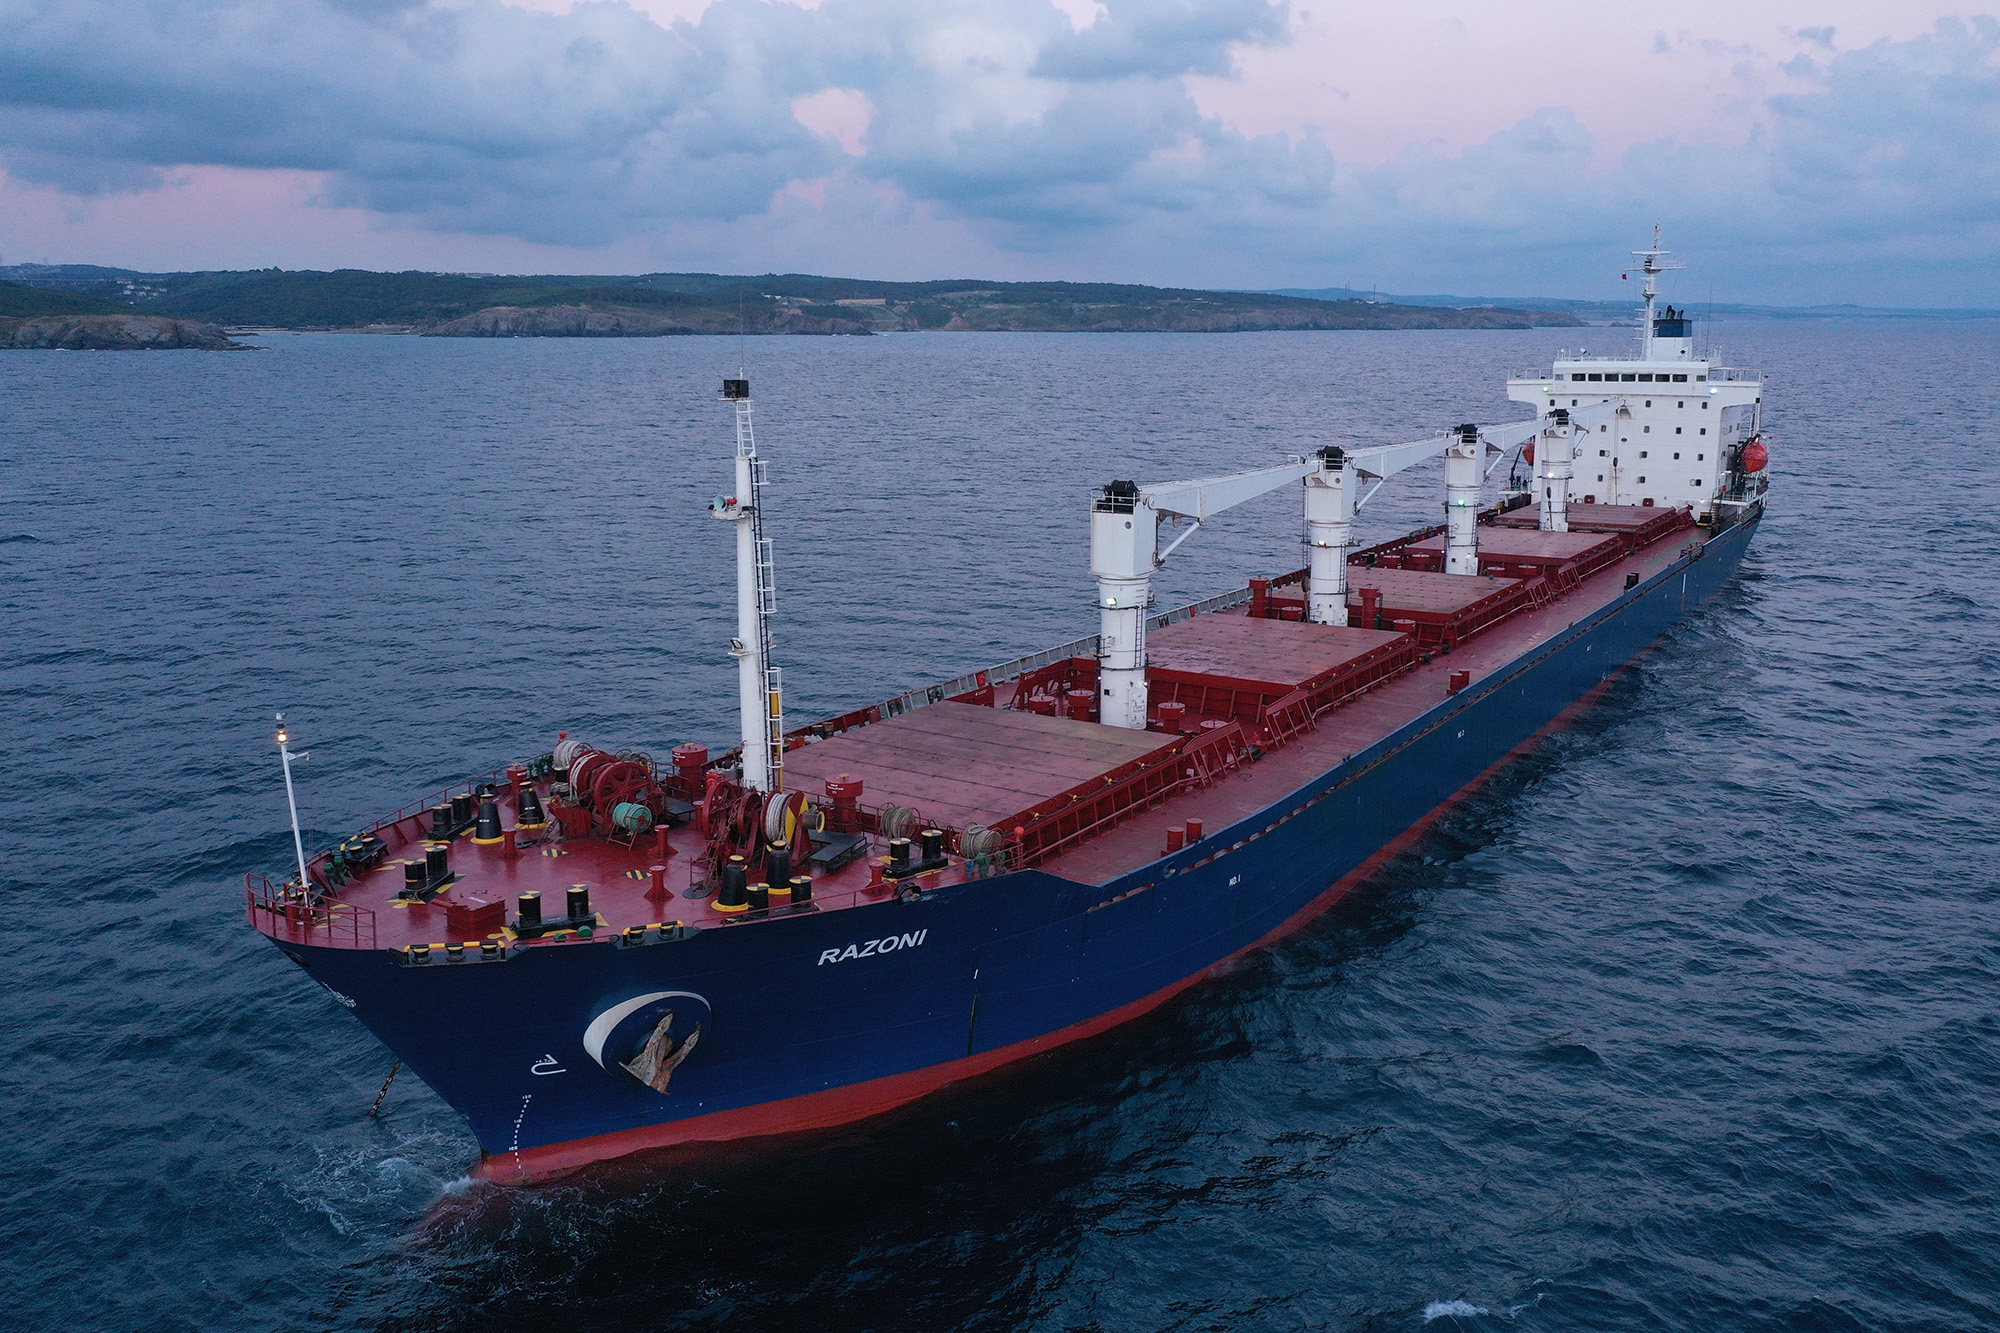 The Sierra Leone-flagged dry cargo ship Razoni, carrying more than 26,000 metric tons of corn arrives at the Black Sea entrance of the Bosporus Strait, in Istanbul on August 3. 